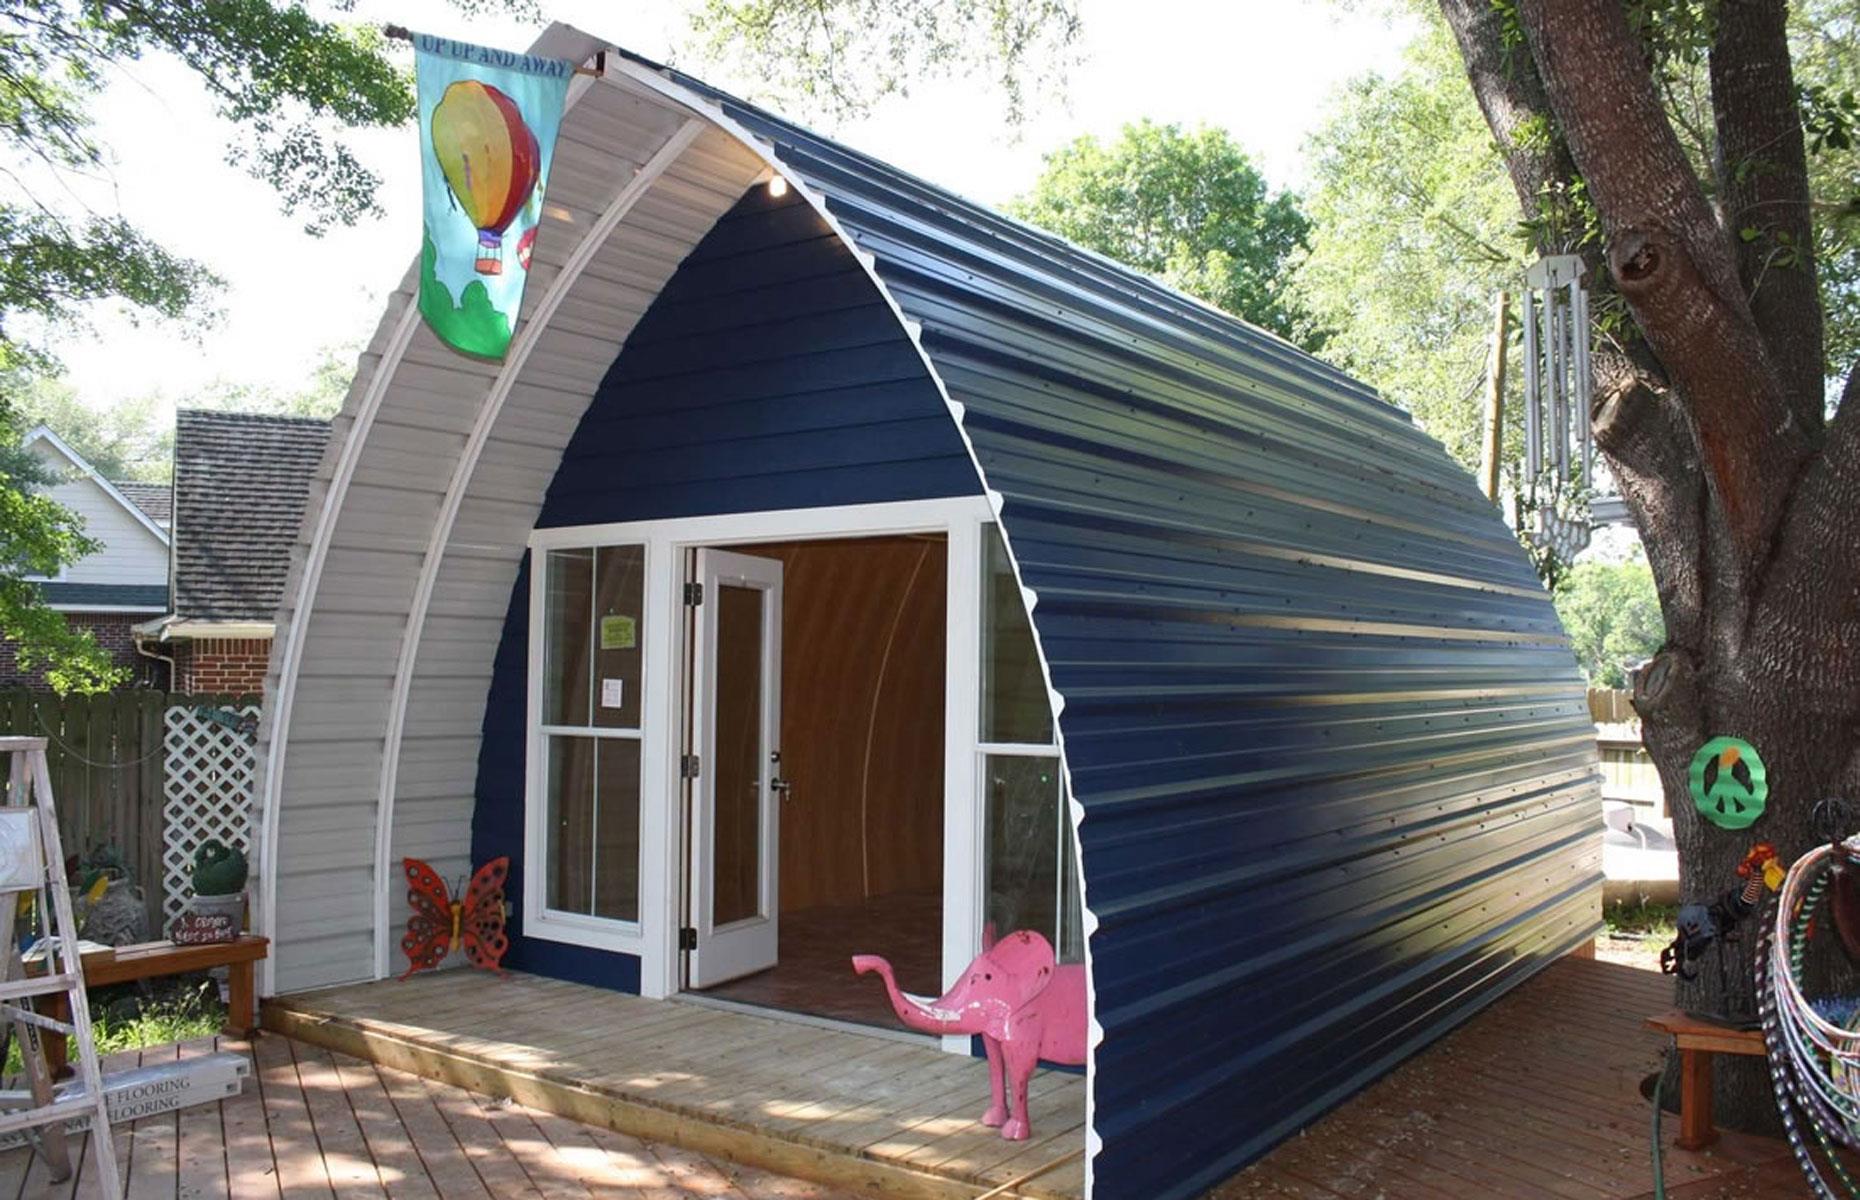 Arched Cabins 12-foot micro home kit: $5,000 (£3.5k)